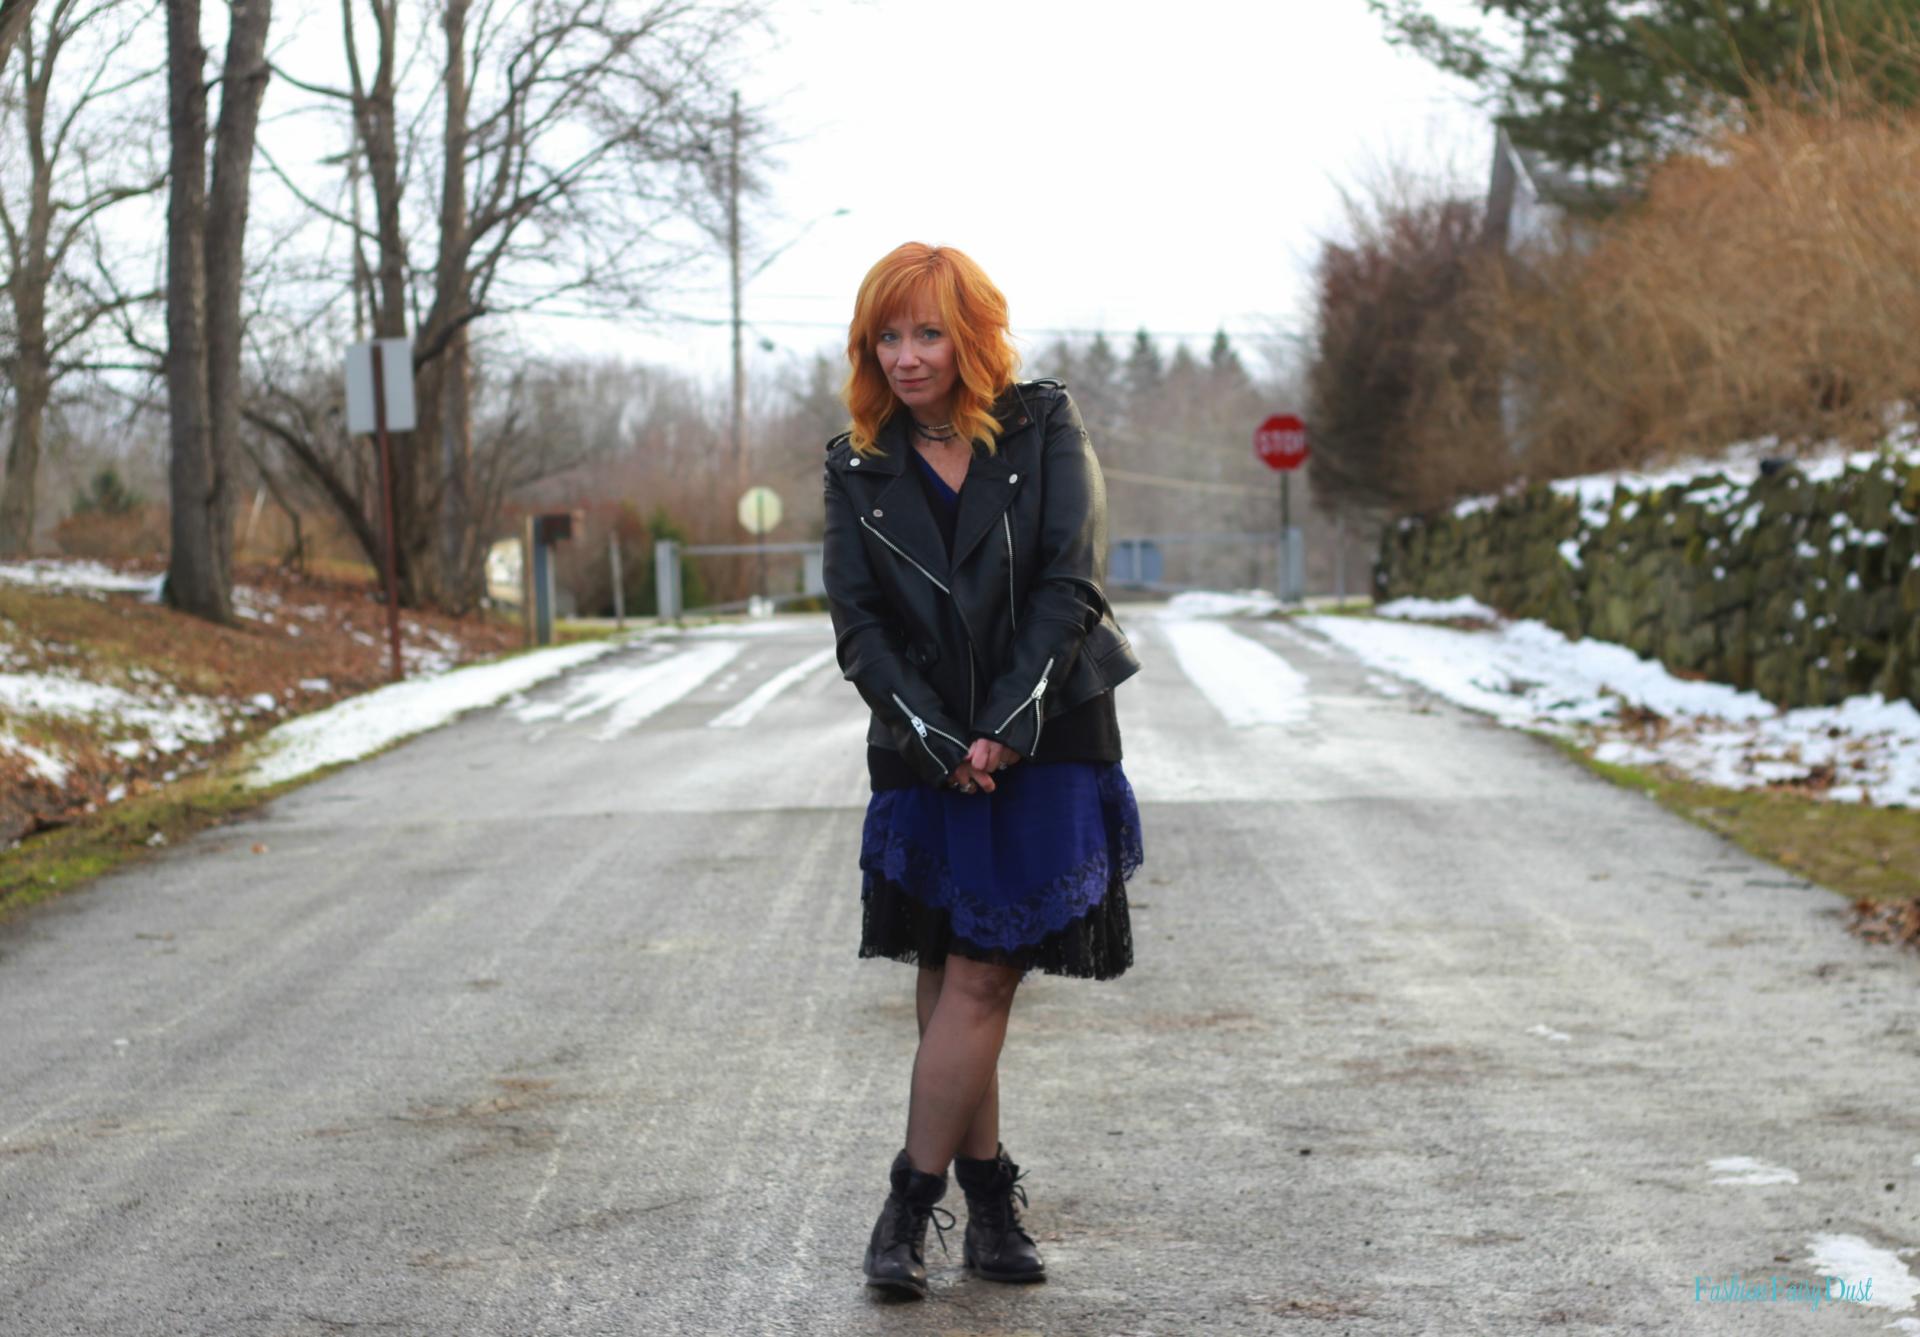 Blue slip dress, moto jacket & combat boots. How to layer lace pieces.